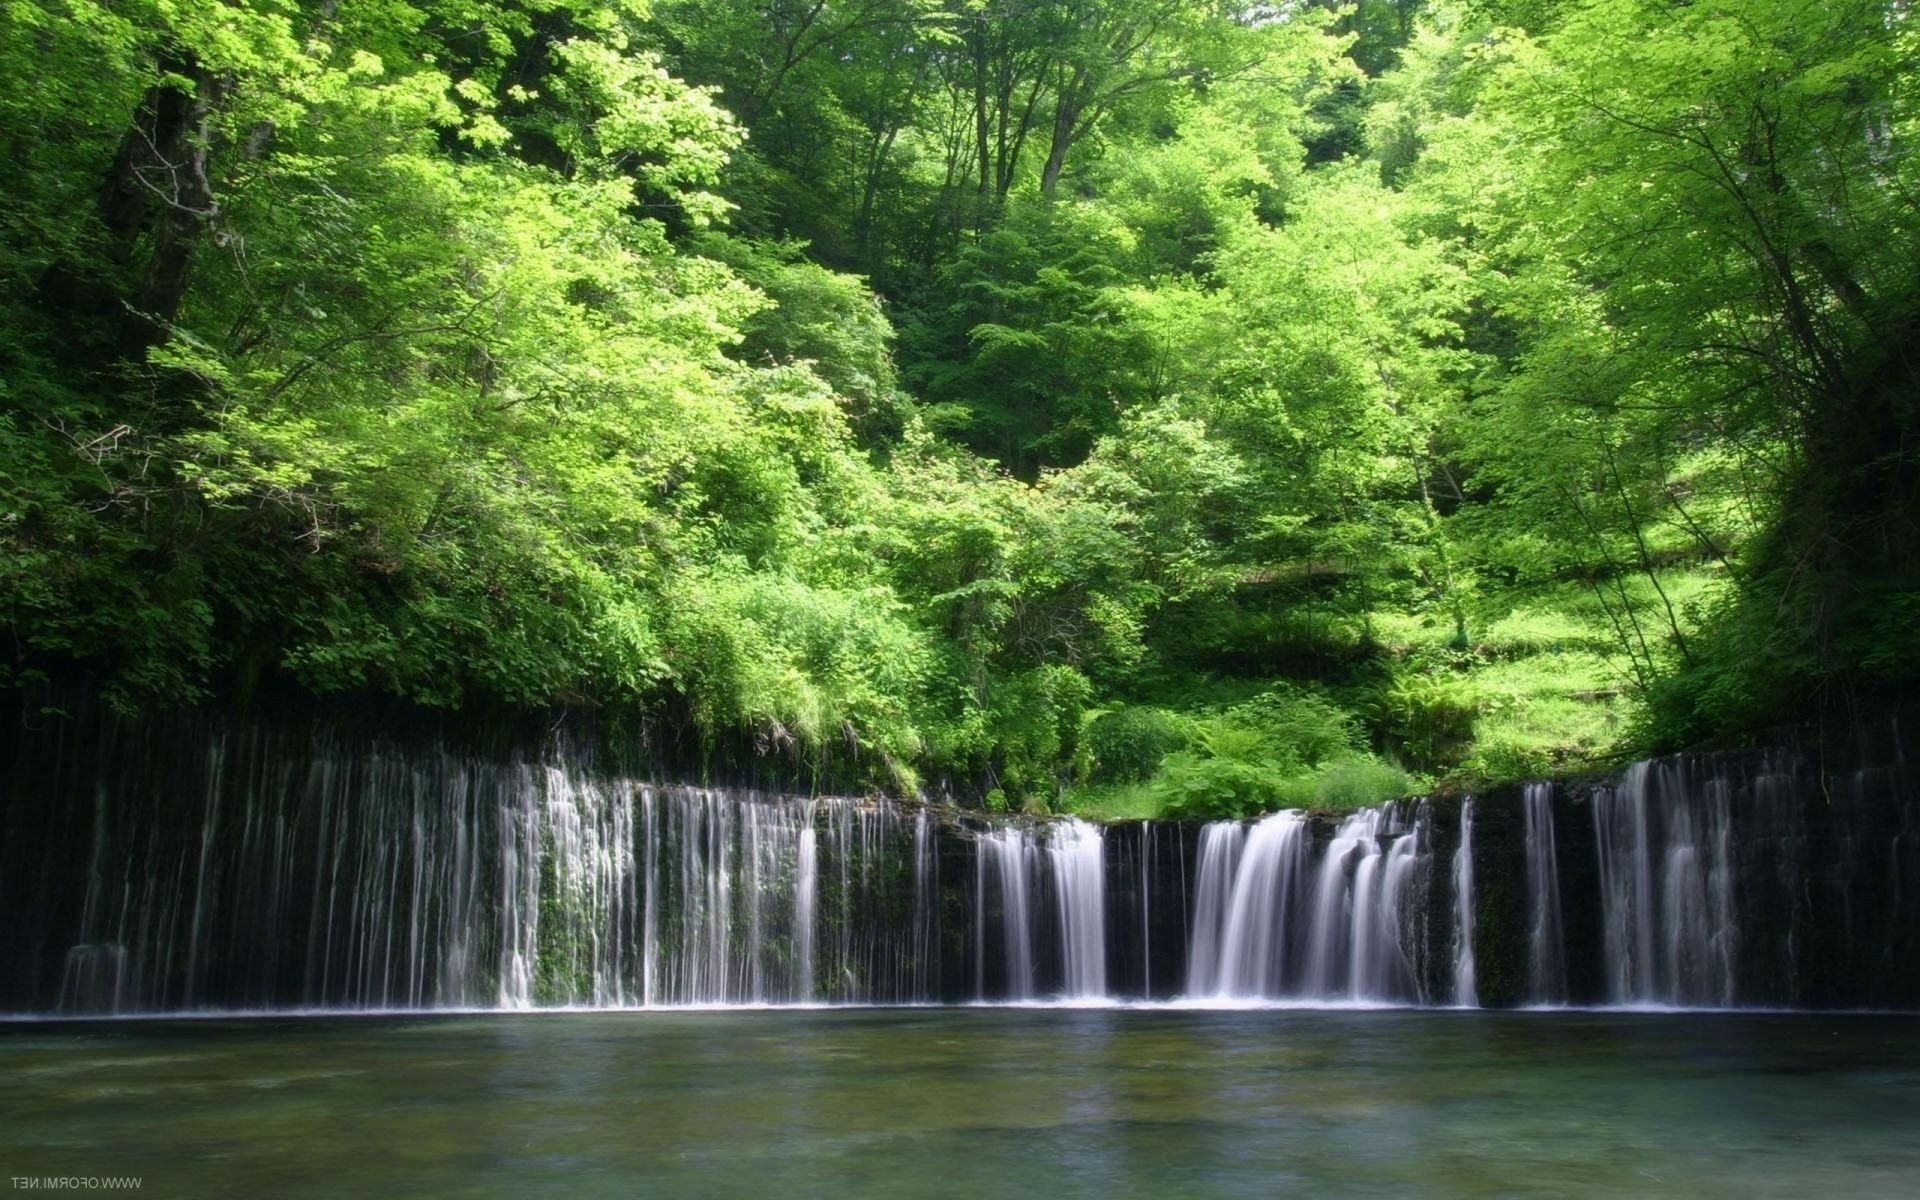 waterfalls water wood nature river waterfall leaf tree stream landscape park environment lush summer outdoors travel wet cascade fall scenic